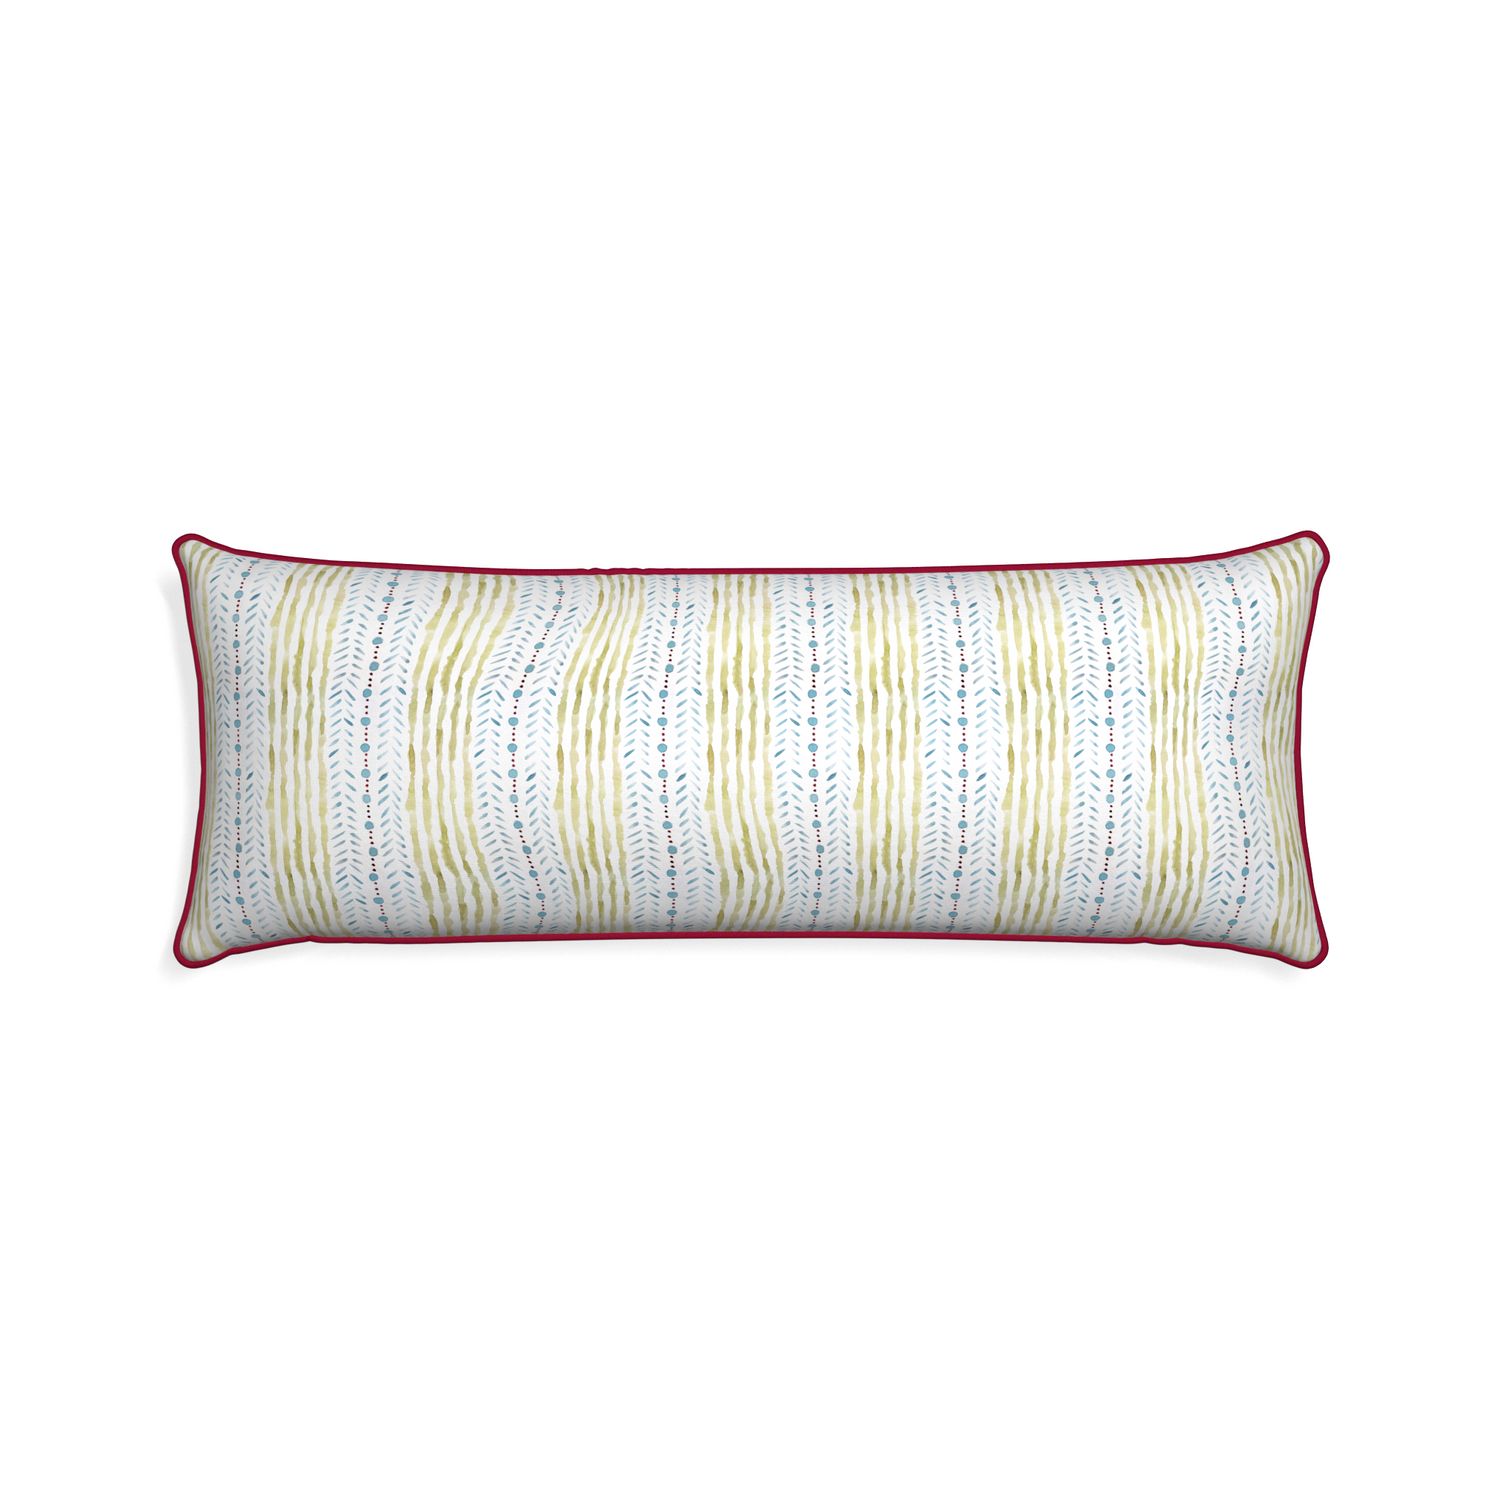 Xl-lumbar julia custom blue & green stripedpillow with raspberry piping on white background